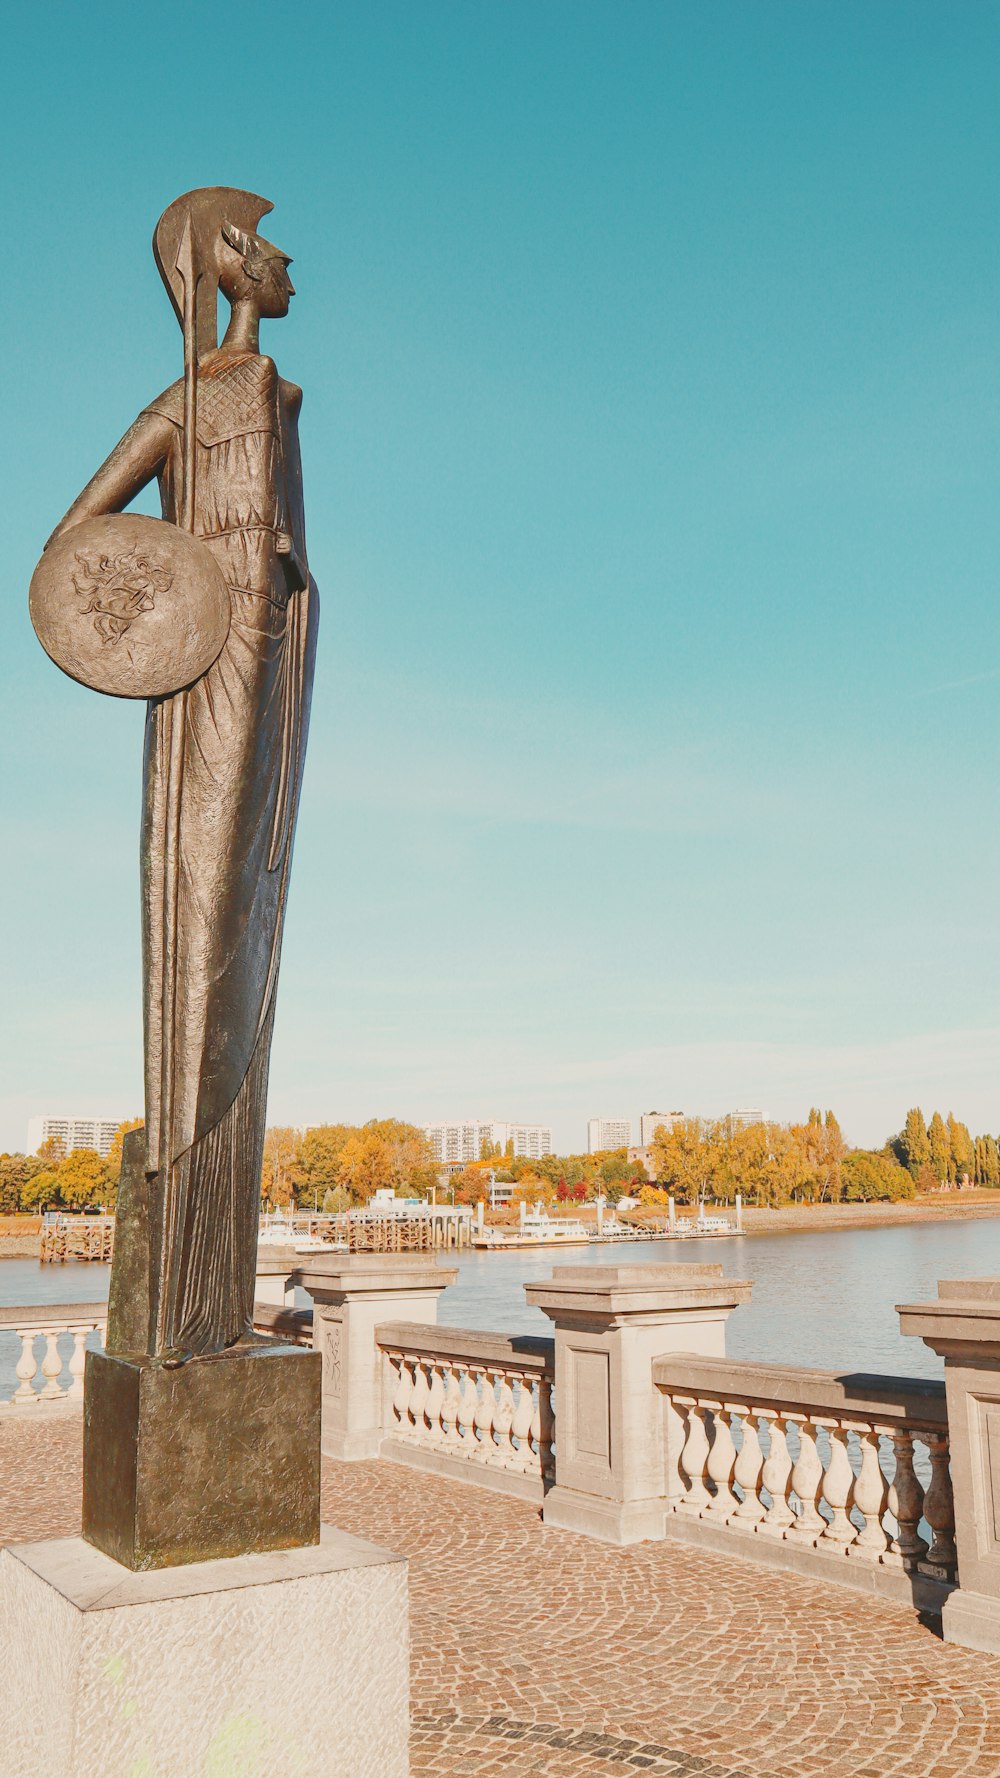 a statue of a person with a beard on a stone pillar by a body of water